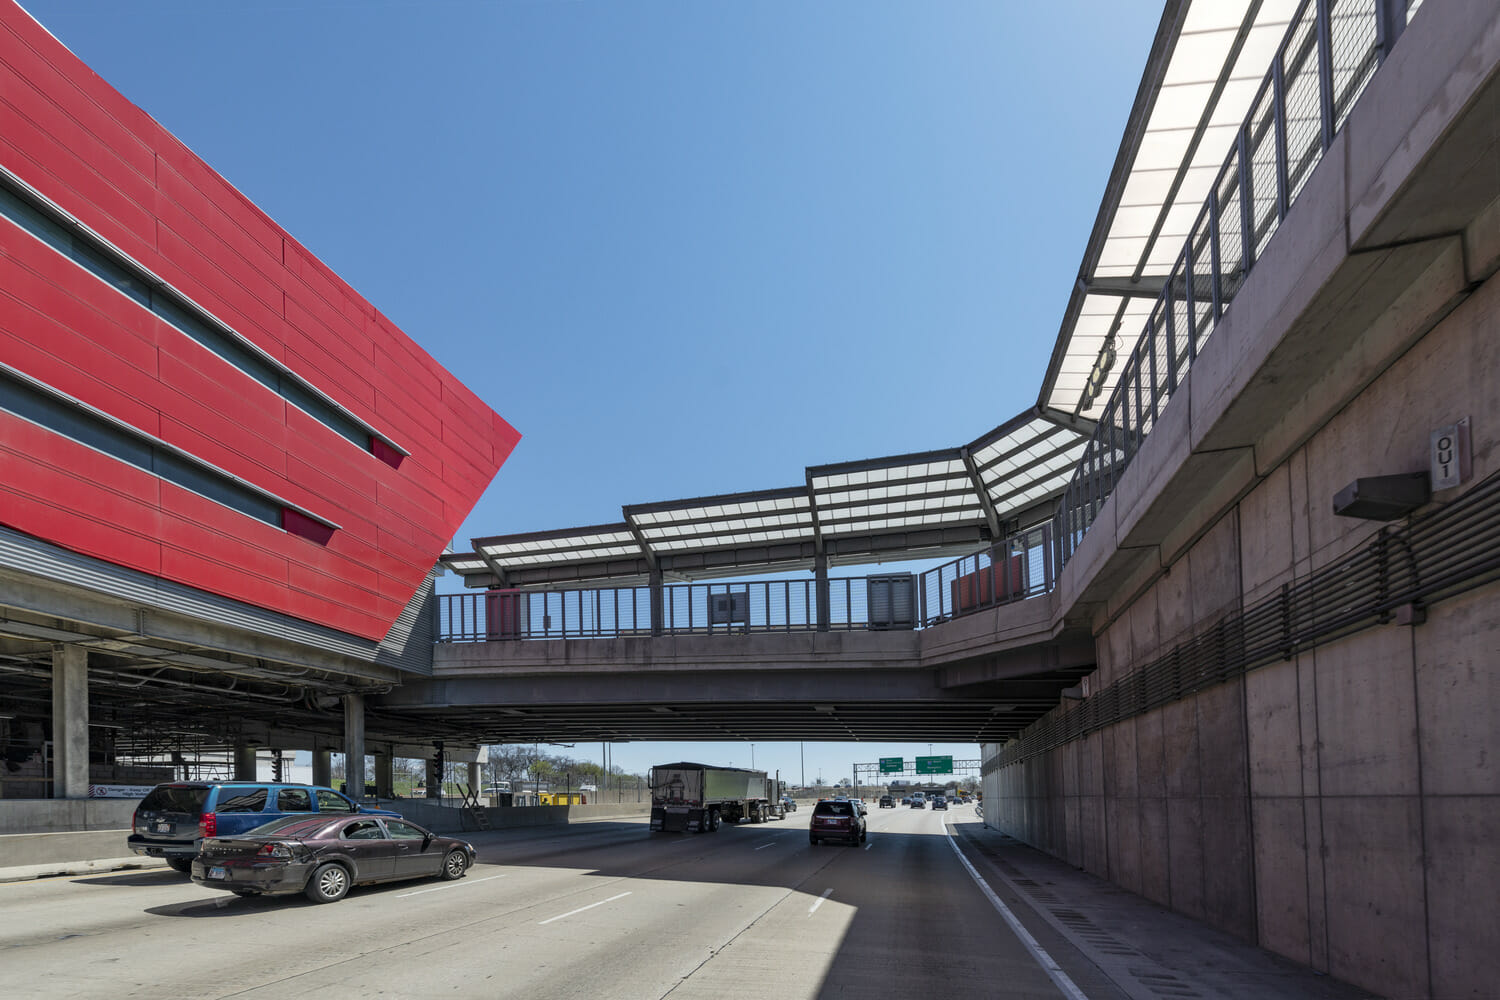 An overpass with a red roof and cars on the road.